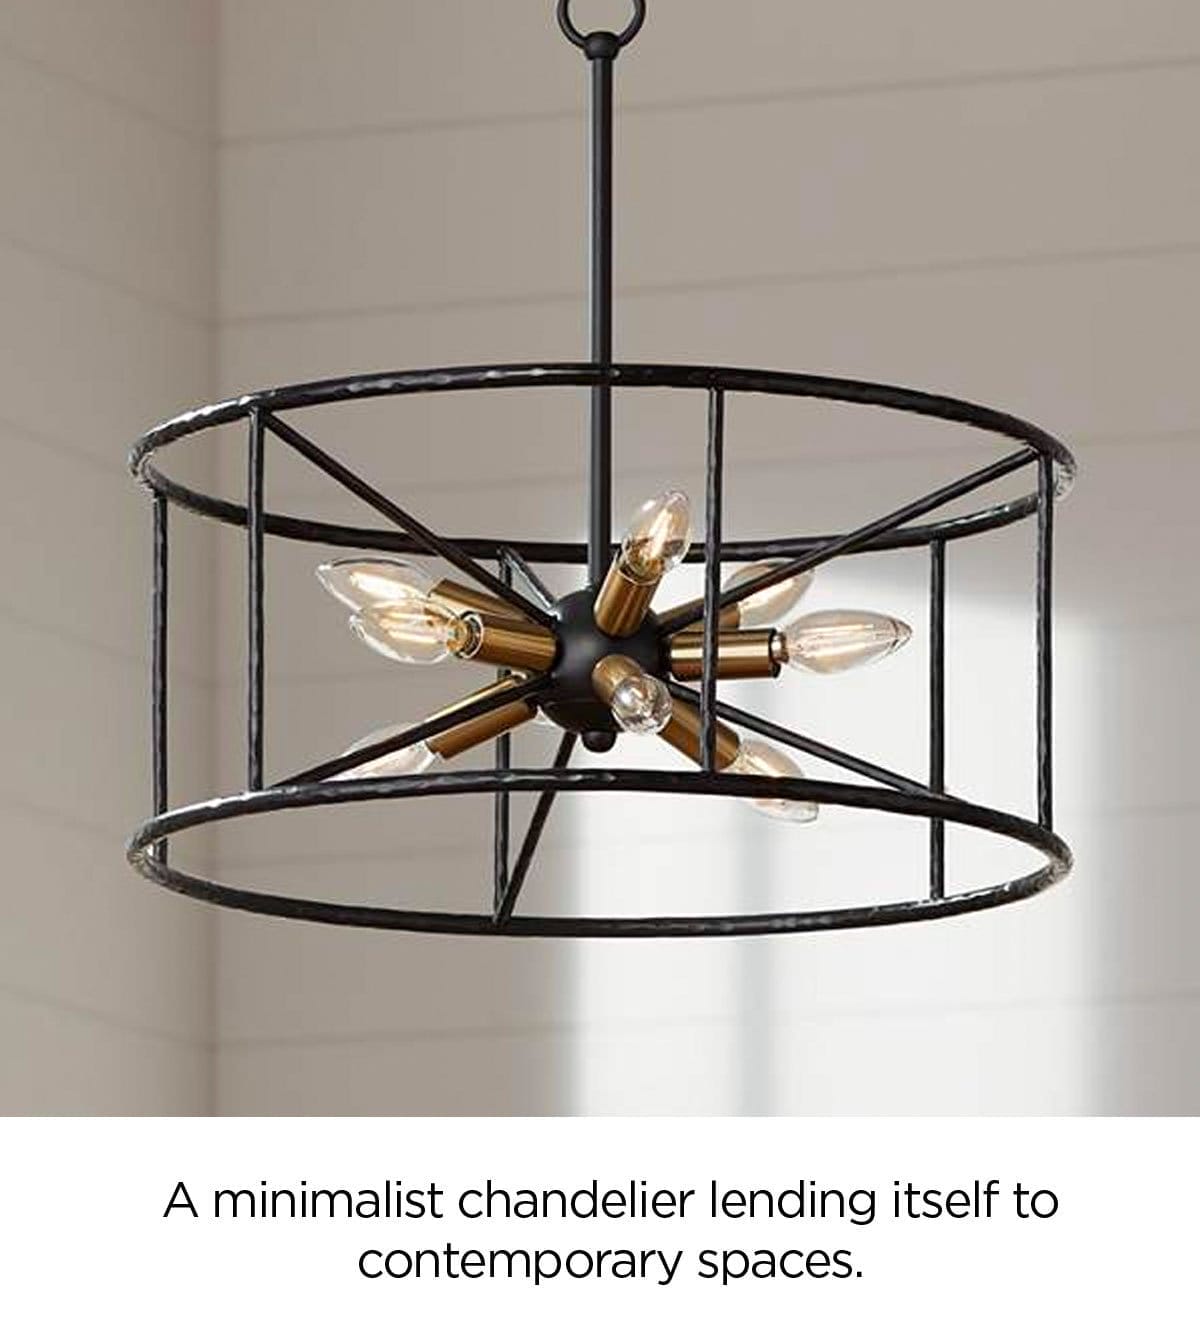 A minimalist chandelier lending itself to contemporary spaces.